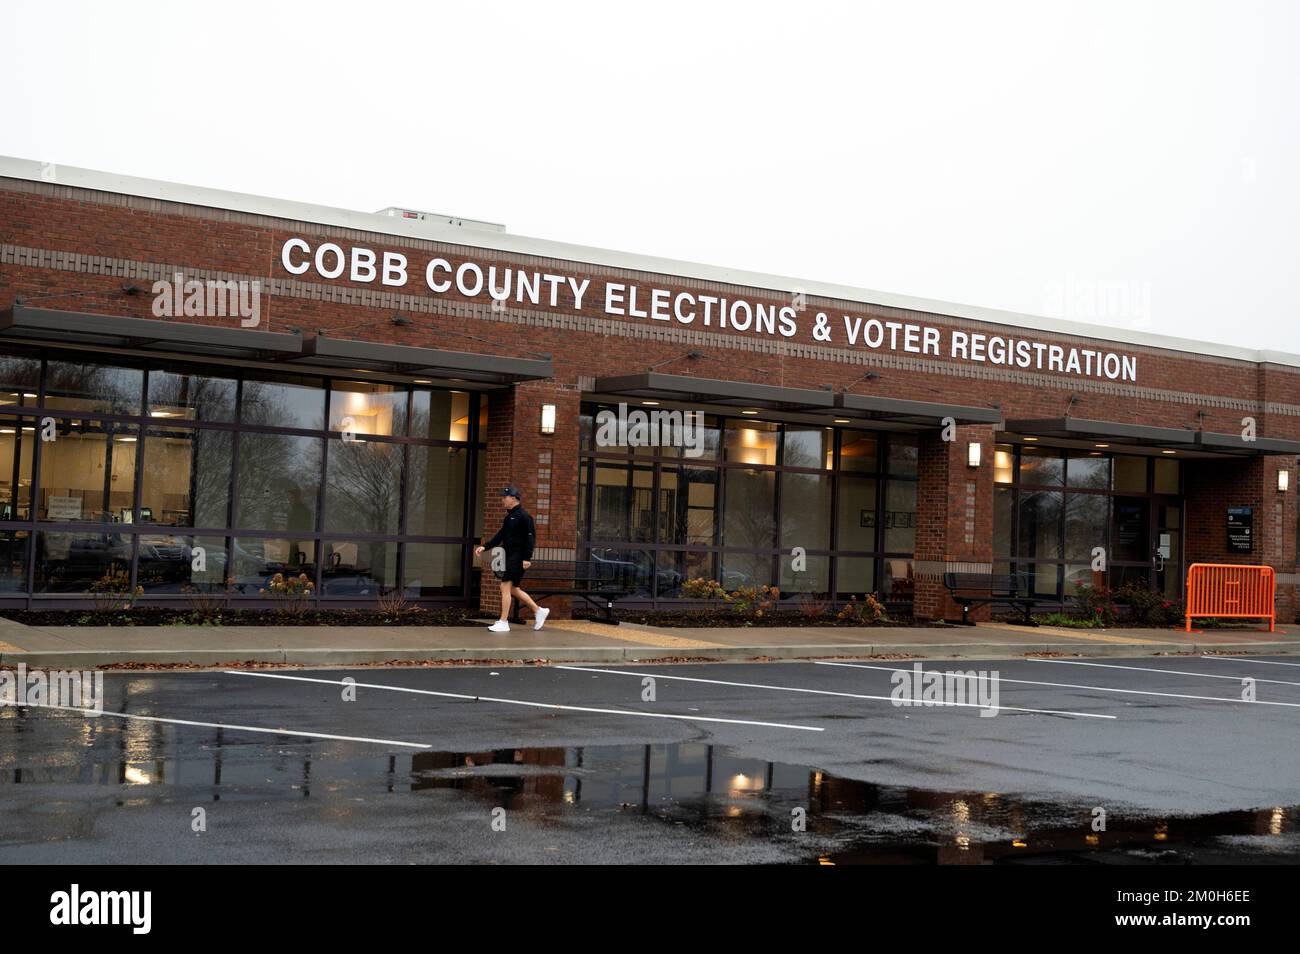 Marietta, Georgia, USA. 6th Dec, 2022. A voter leaves the Cobb County election office having just deposited his absentee ballot with an election official. Cobb County Superior Court Judge Kellie Hill has issued an order extending the deadline for certain absentee ballots to be returned to the Cobb Elections office for the December 6 runoff election.This was a consent order between the ACLU and Cobb County Board of Elections and Registration, citing a 'confluence of deadlines,'' including a holiday, a new state statute, and the Thanksgiving holiday that led to a delay in sending out some Stock Photo